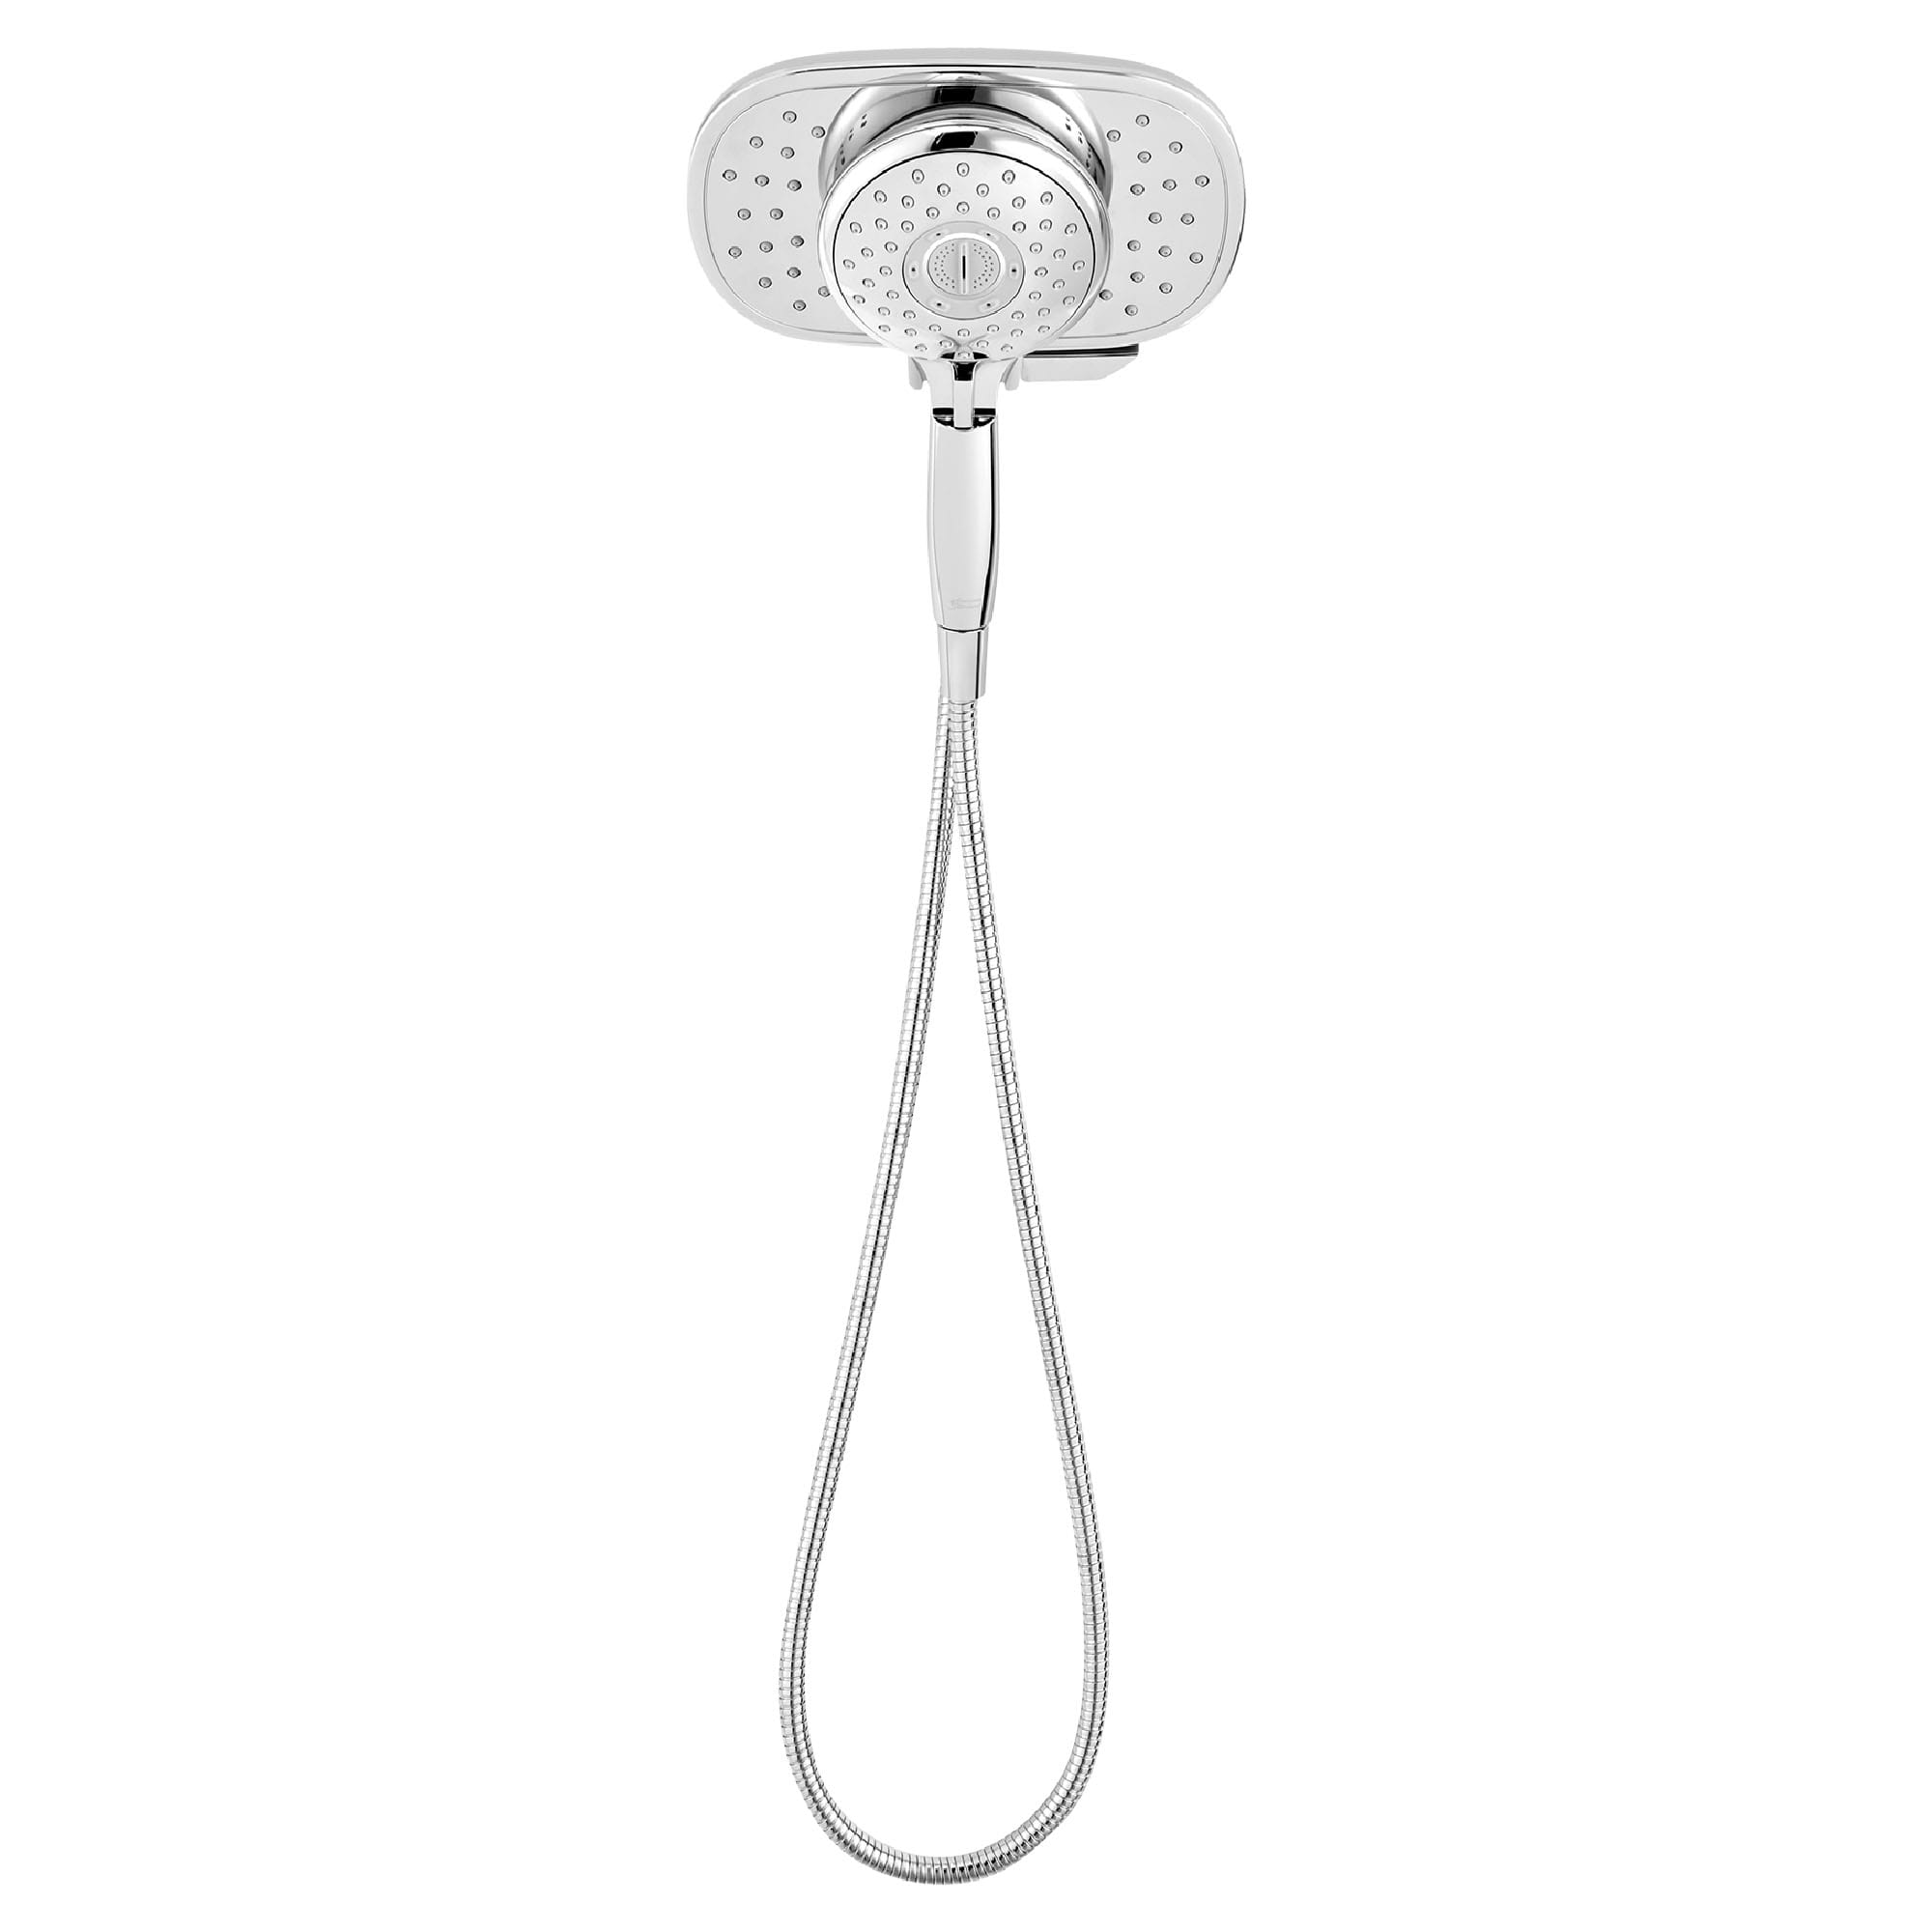 Spectra Duo 2.5 GPM 4-Function 2-in-1 Shower Head